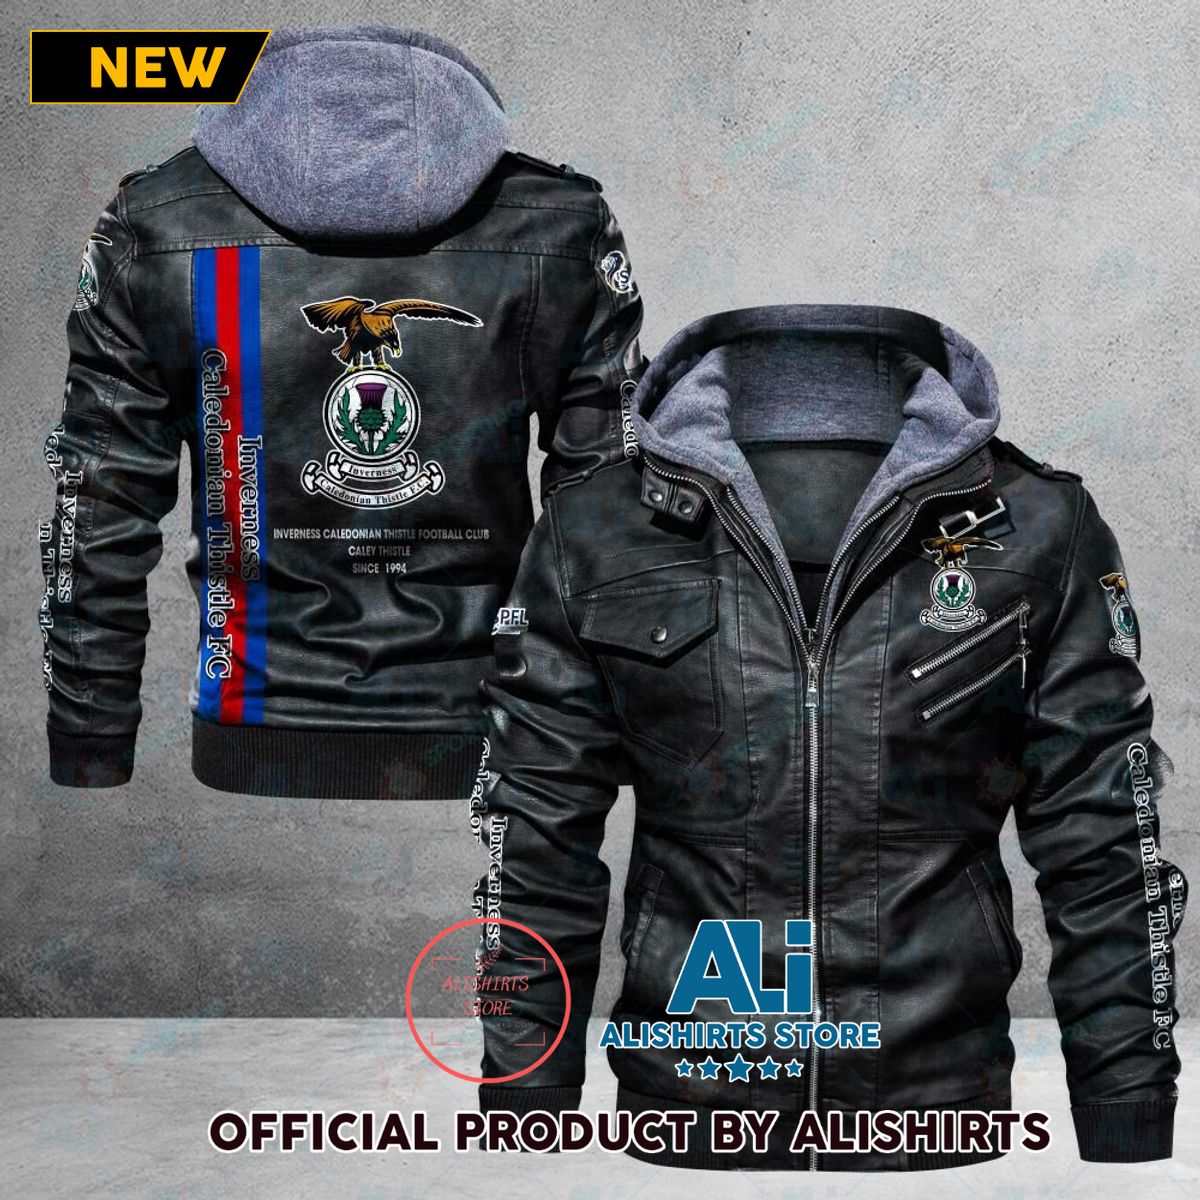 Inverness Caledonian Thistle FC Scottish Championship Leather Jacket For Football Soccer Fan